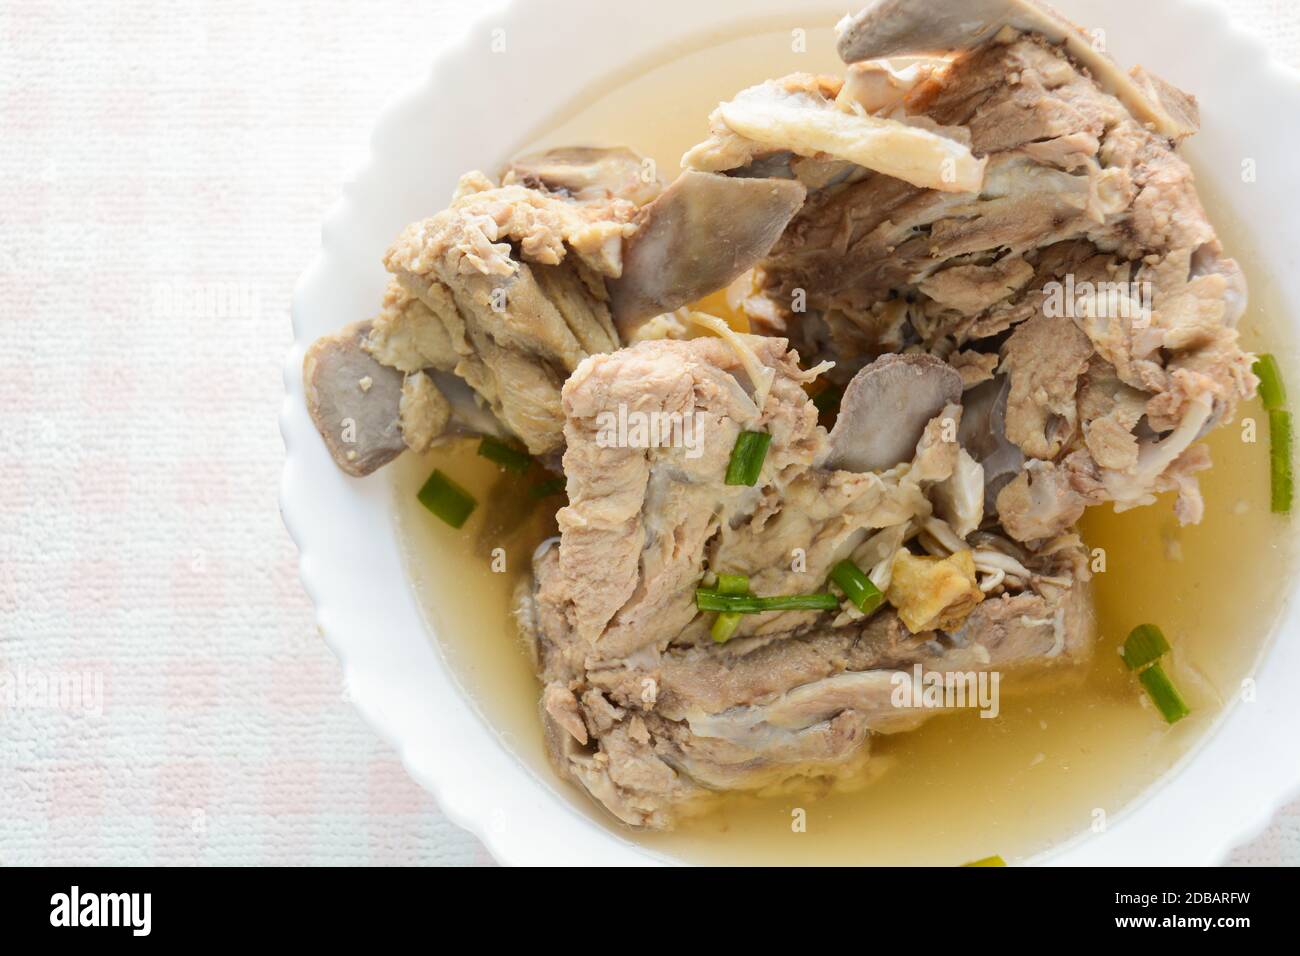 https://c8.alamy.com/comp/2DBARFW/slow-cooker-pork-bone-broth-its-simmered-for-many-hours-to-extract-as-much-nutrients-from-it-the-long-cooking-time-breaks-down-bone-to-release-vita-2DBARFW.jpg